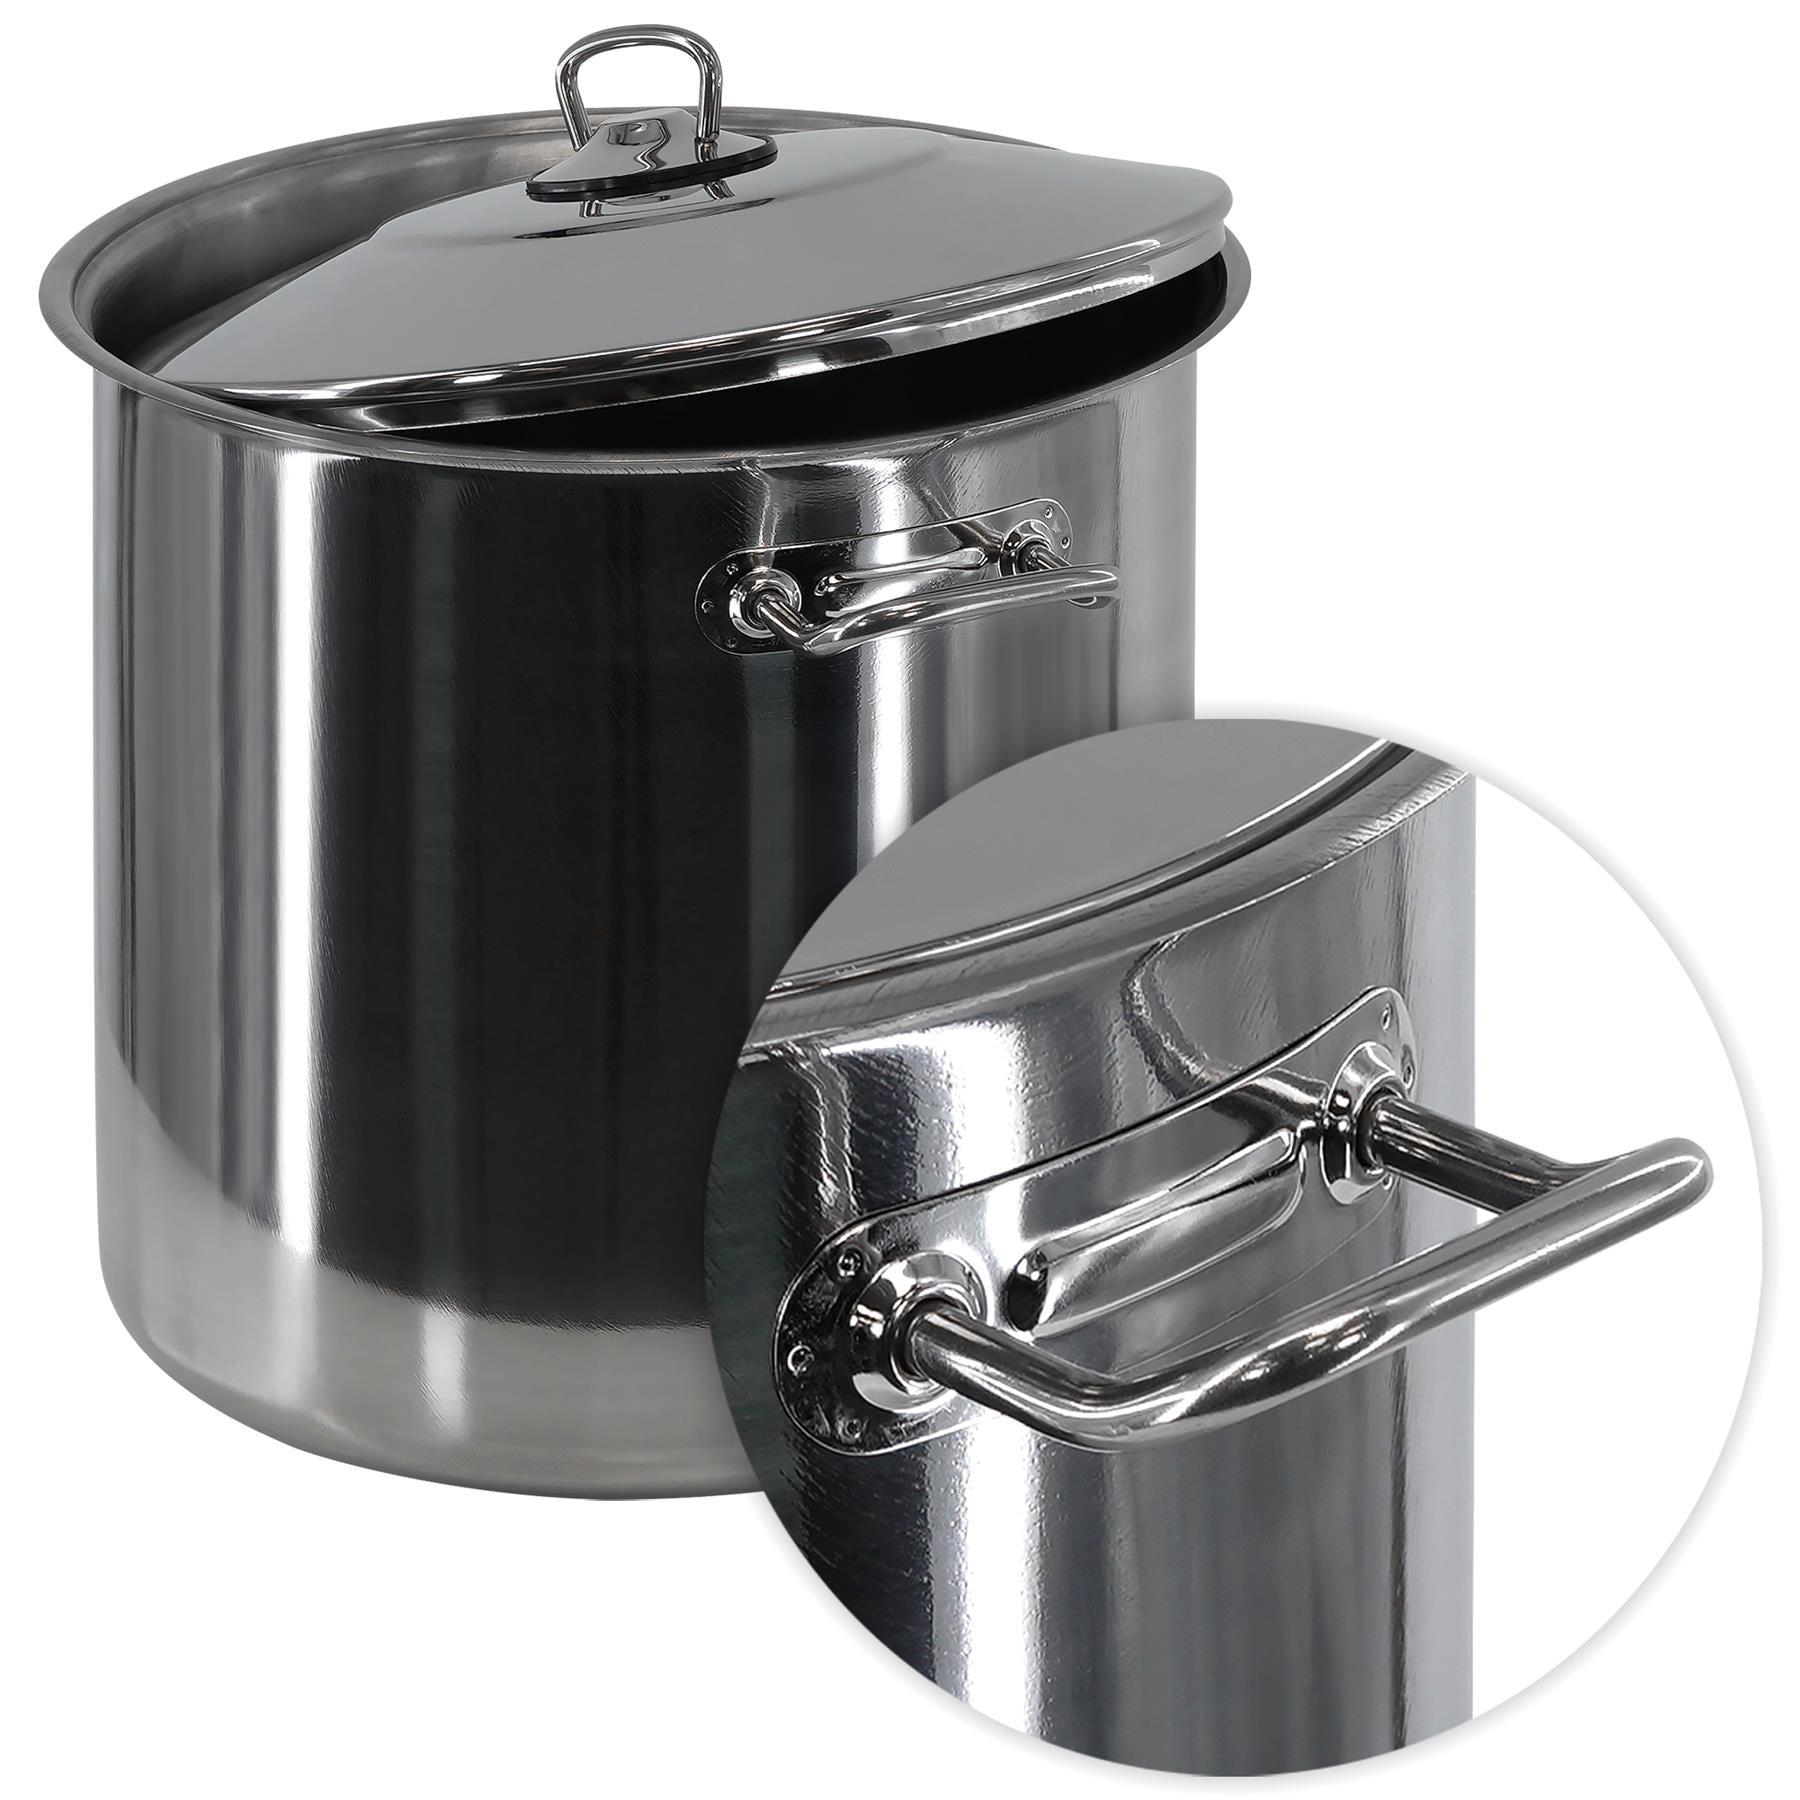 Arian Gastro Stock Pot - 17 Litre by GEEZY - UKBuyZone